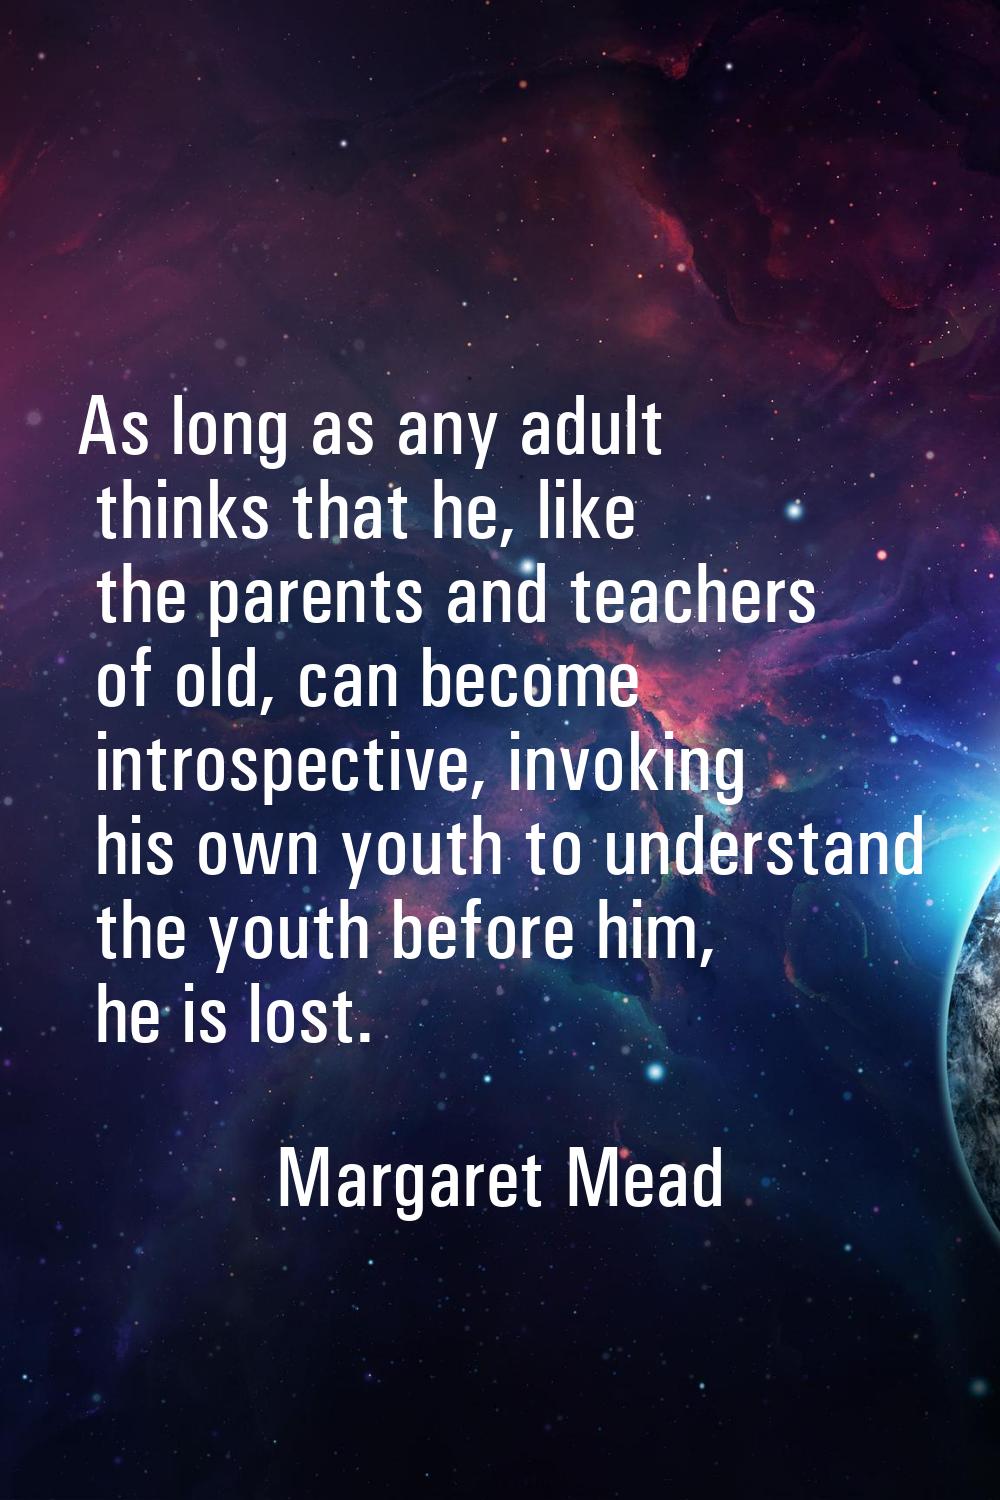 As long as any adult thinks that he, like the parents and teachers of old, can become introspective